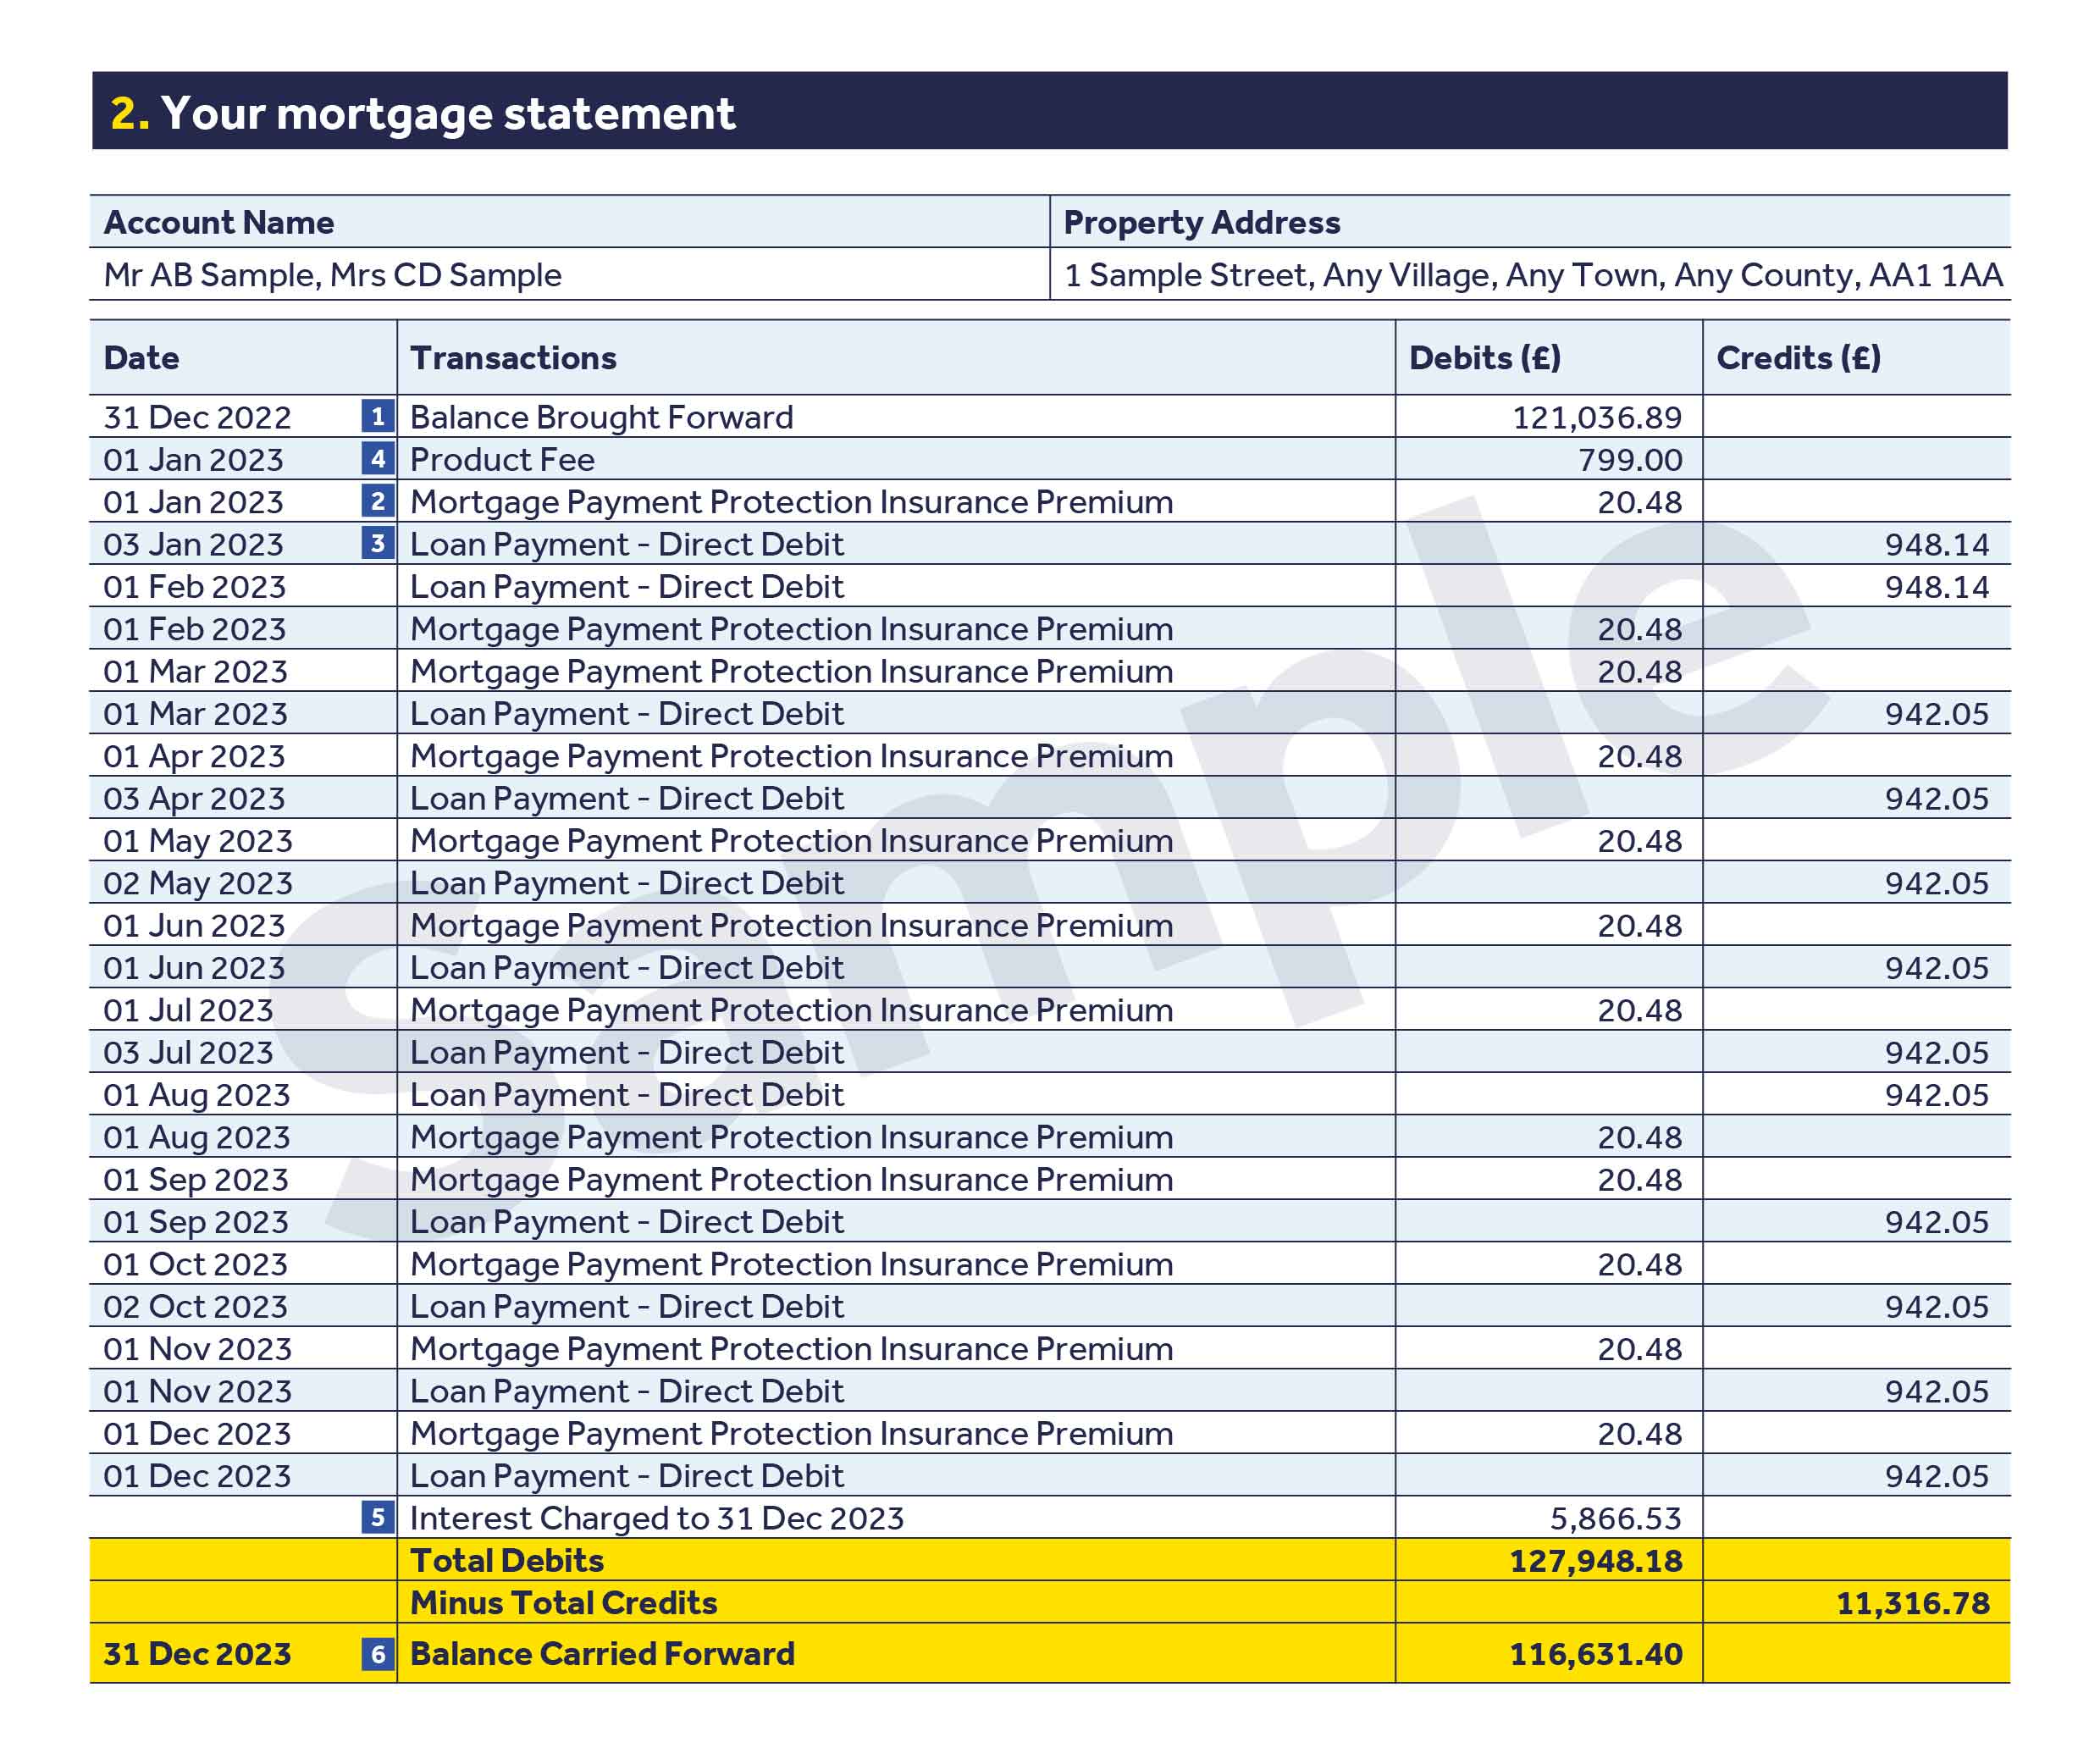 Your mortgage statement